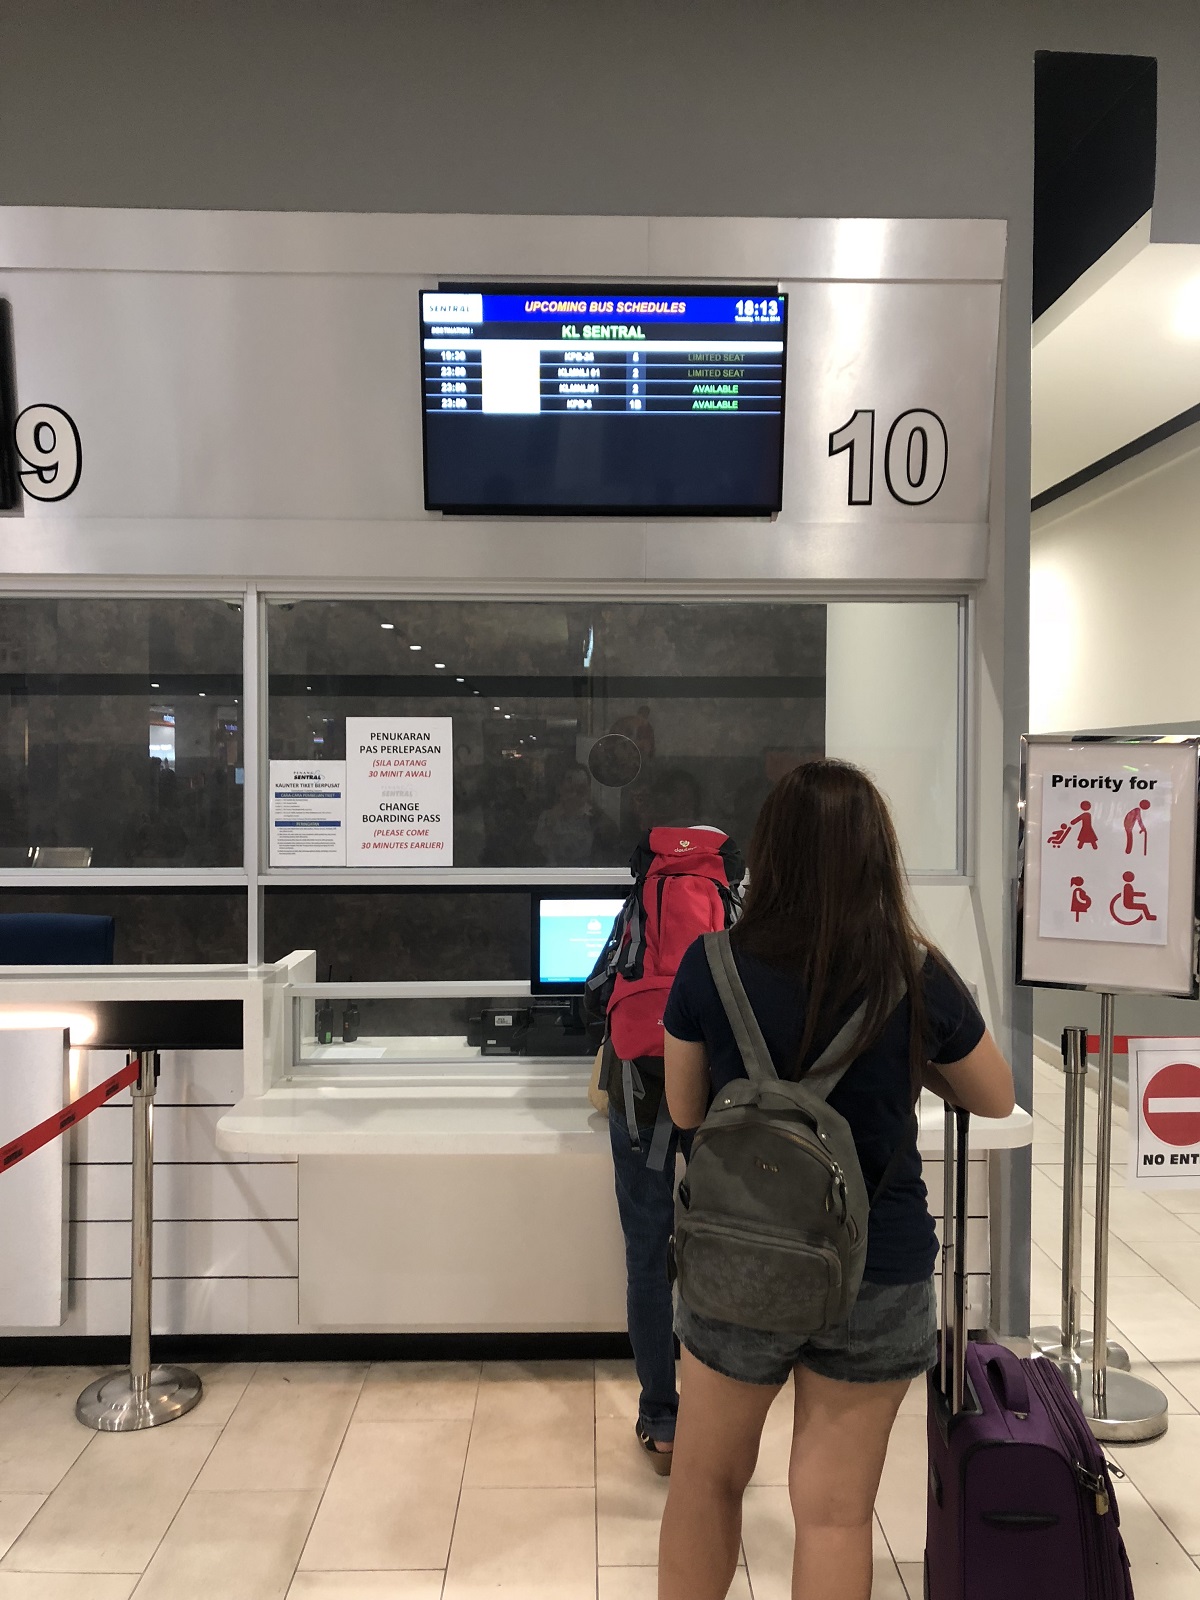 Counter 10 for Online Booking check in